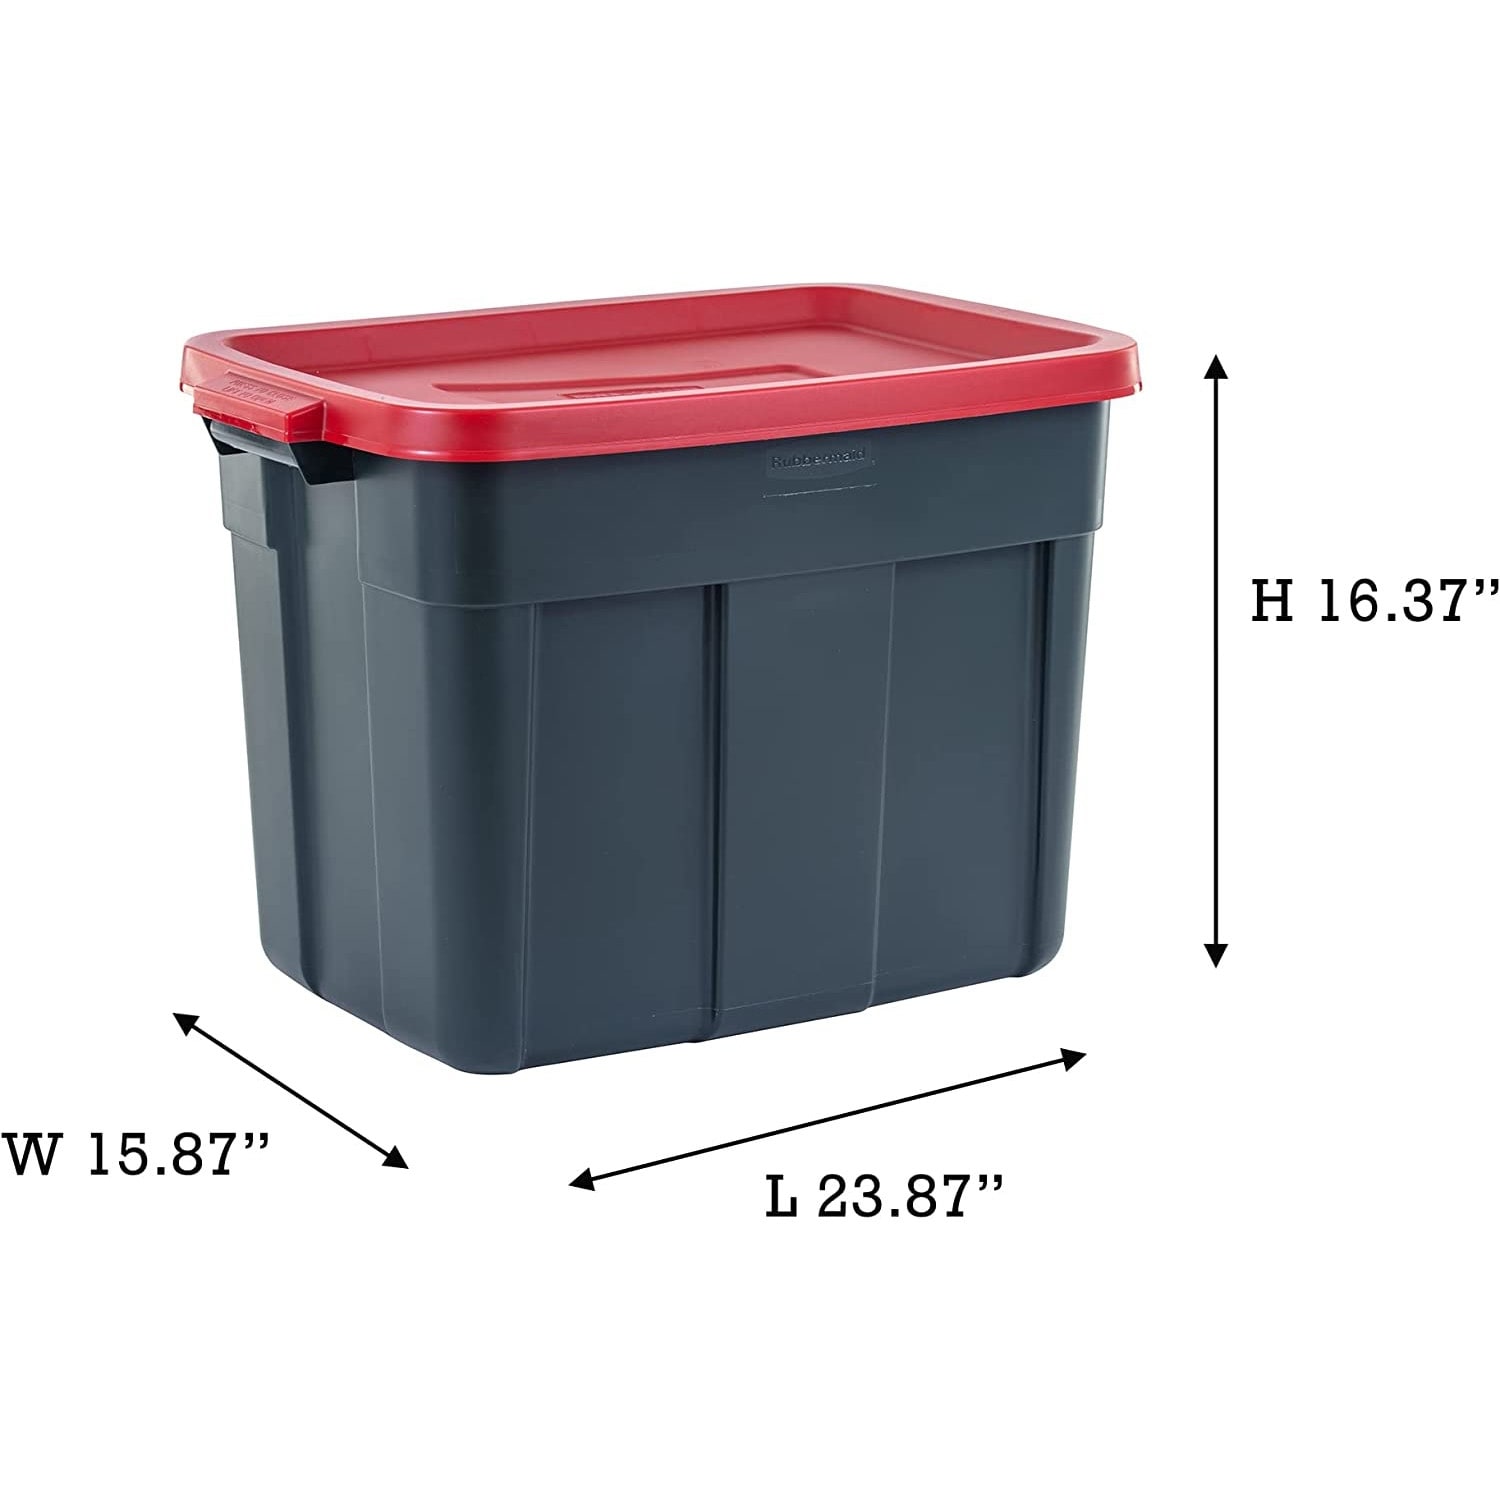 https://ak1.ostkcdn.com/images/products/is/images/direct/e341c05fd0d1bec6364656b266bd8fb94066f7bf/Rubbermaid-Roughneck-18-Gal-Plastic-Holiday-Storage-Tote%2C-Green-and-Red-%286-Pack%29.jpg